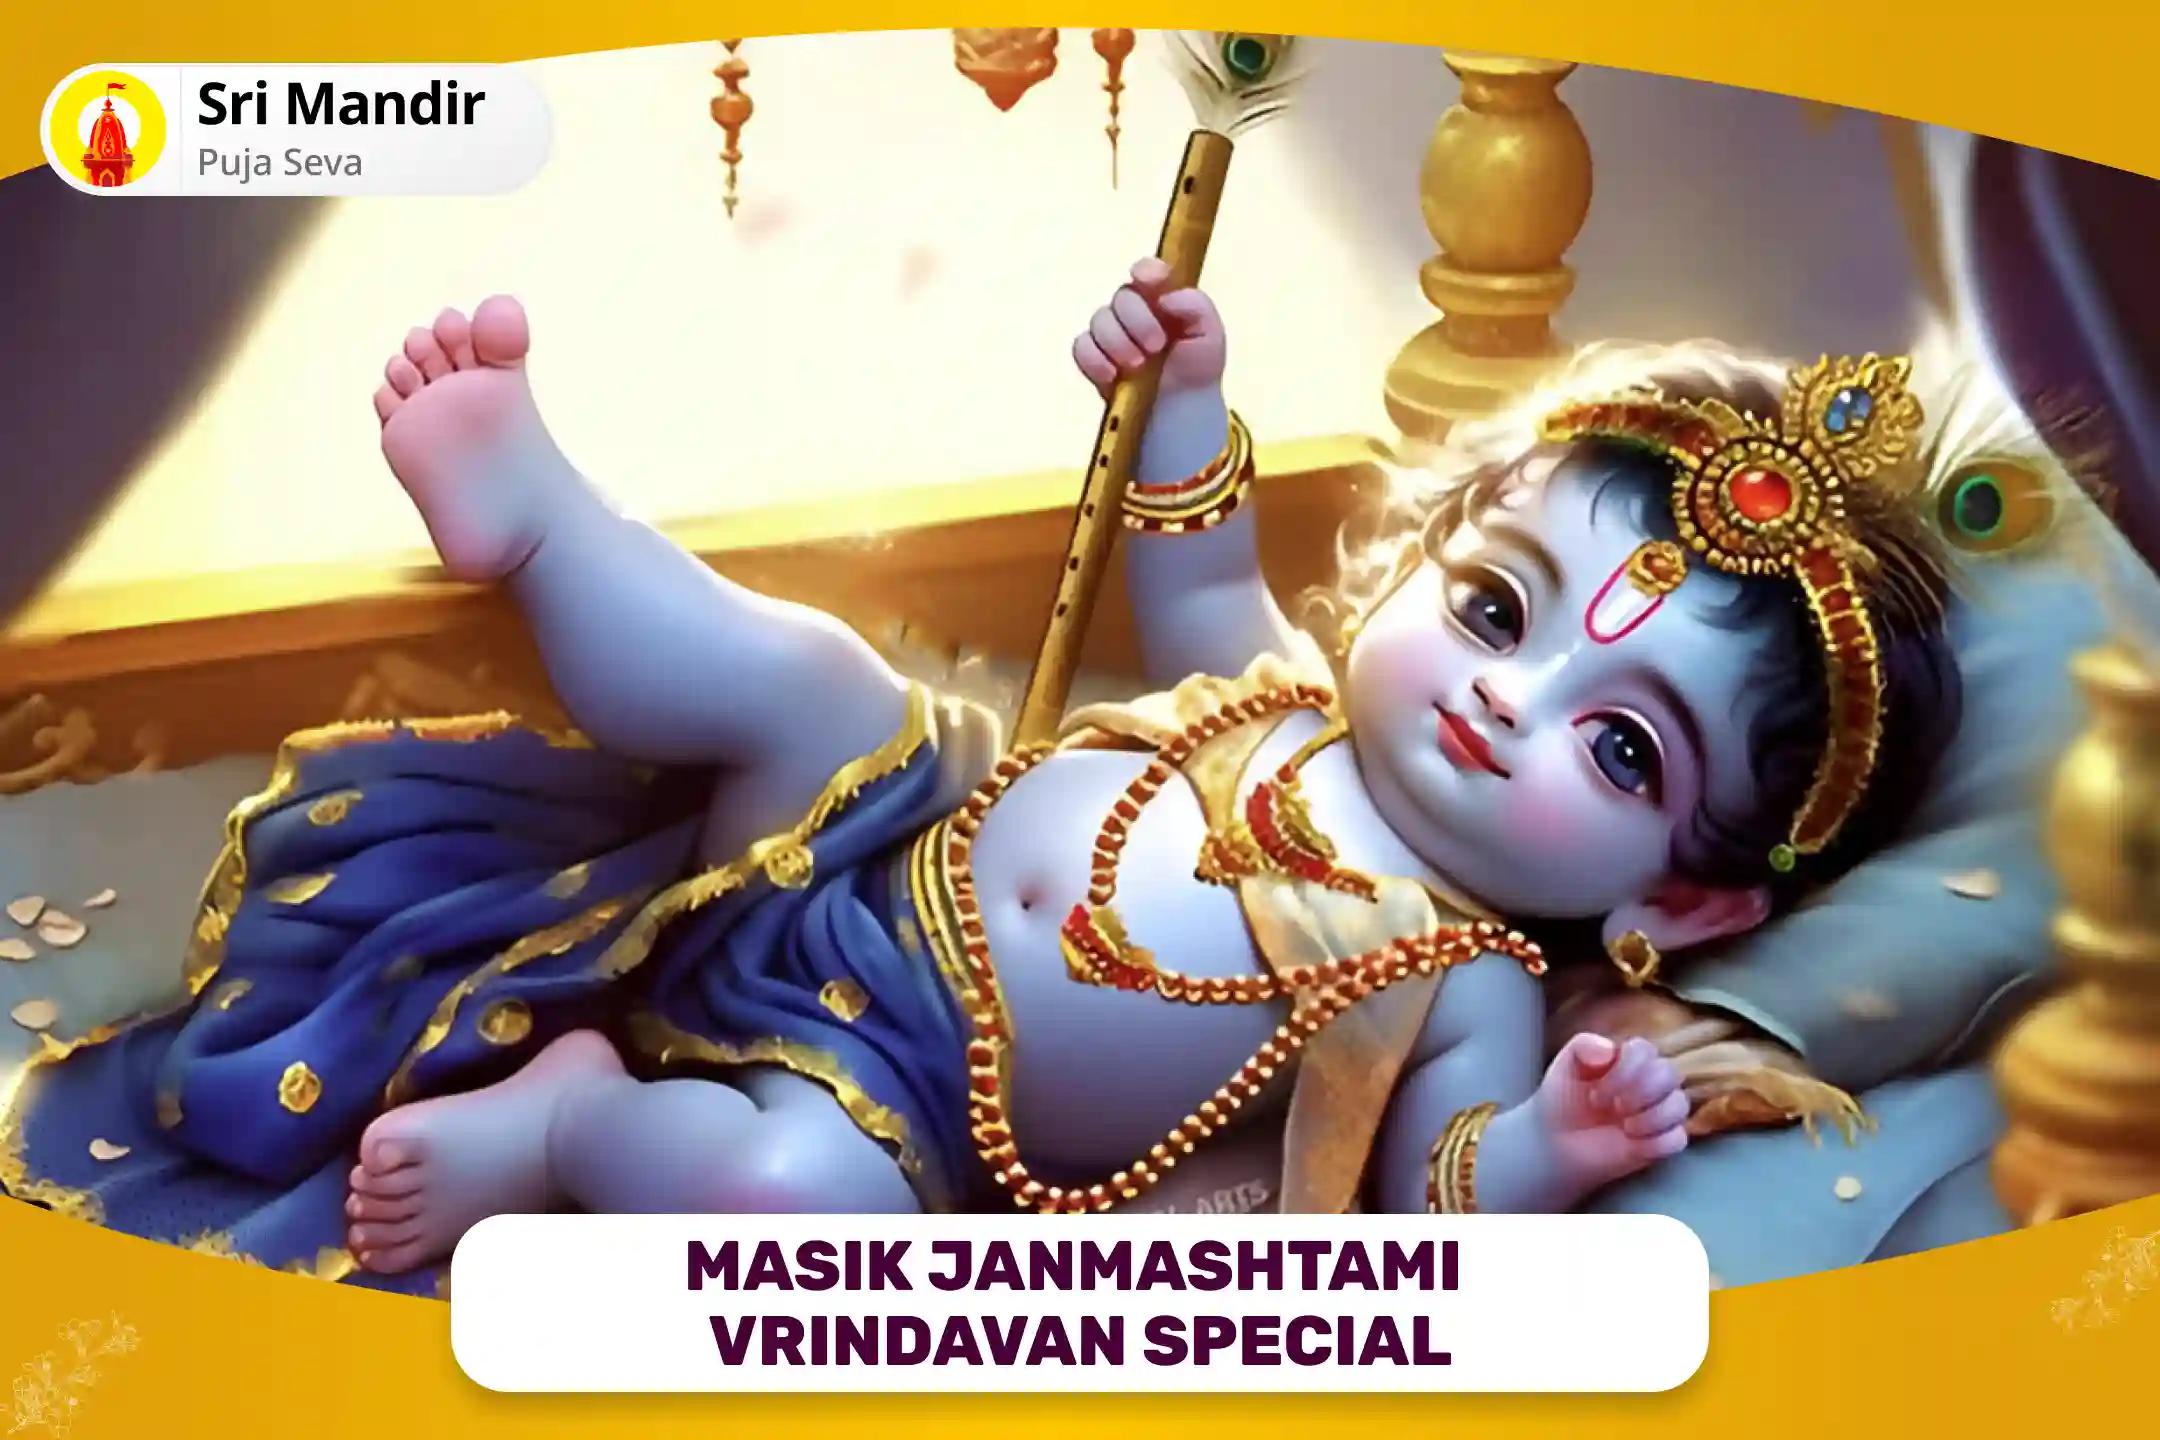 Masik Janmashtami Vrindavan Special Santan Gopal Puja and Laddu Gopal Dudh Abhishek For Health and Well-being of your Children